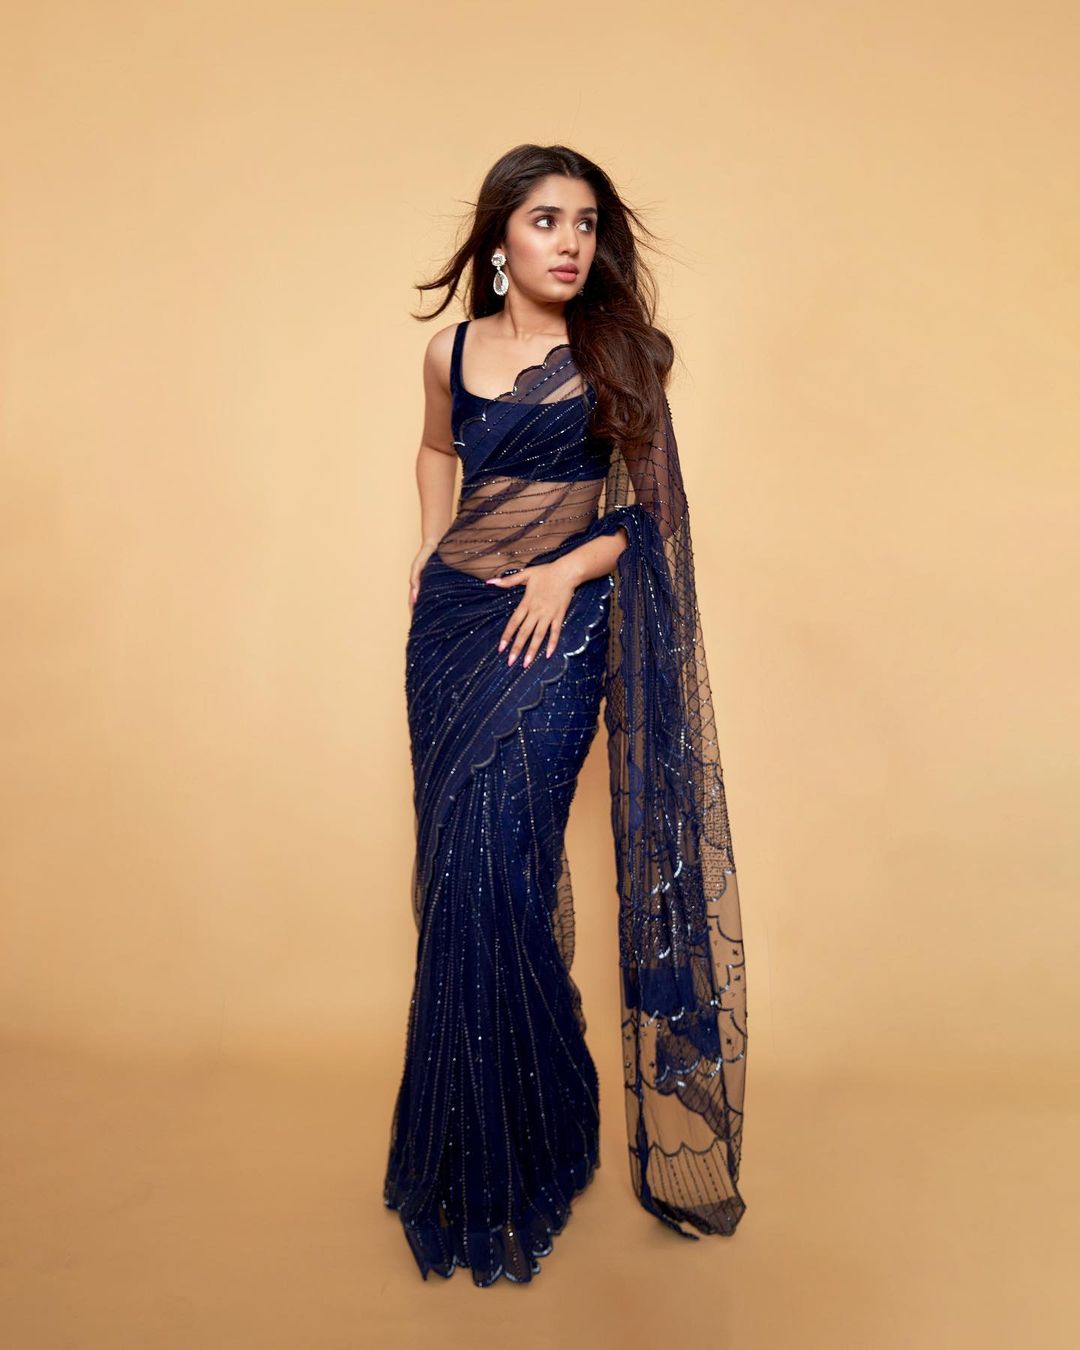 Krithi Shetty Look Hot In Glittery Blue Saree